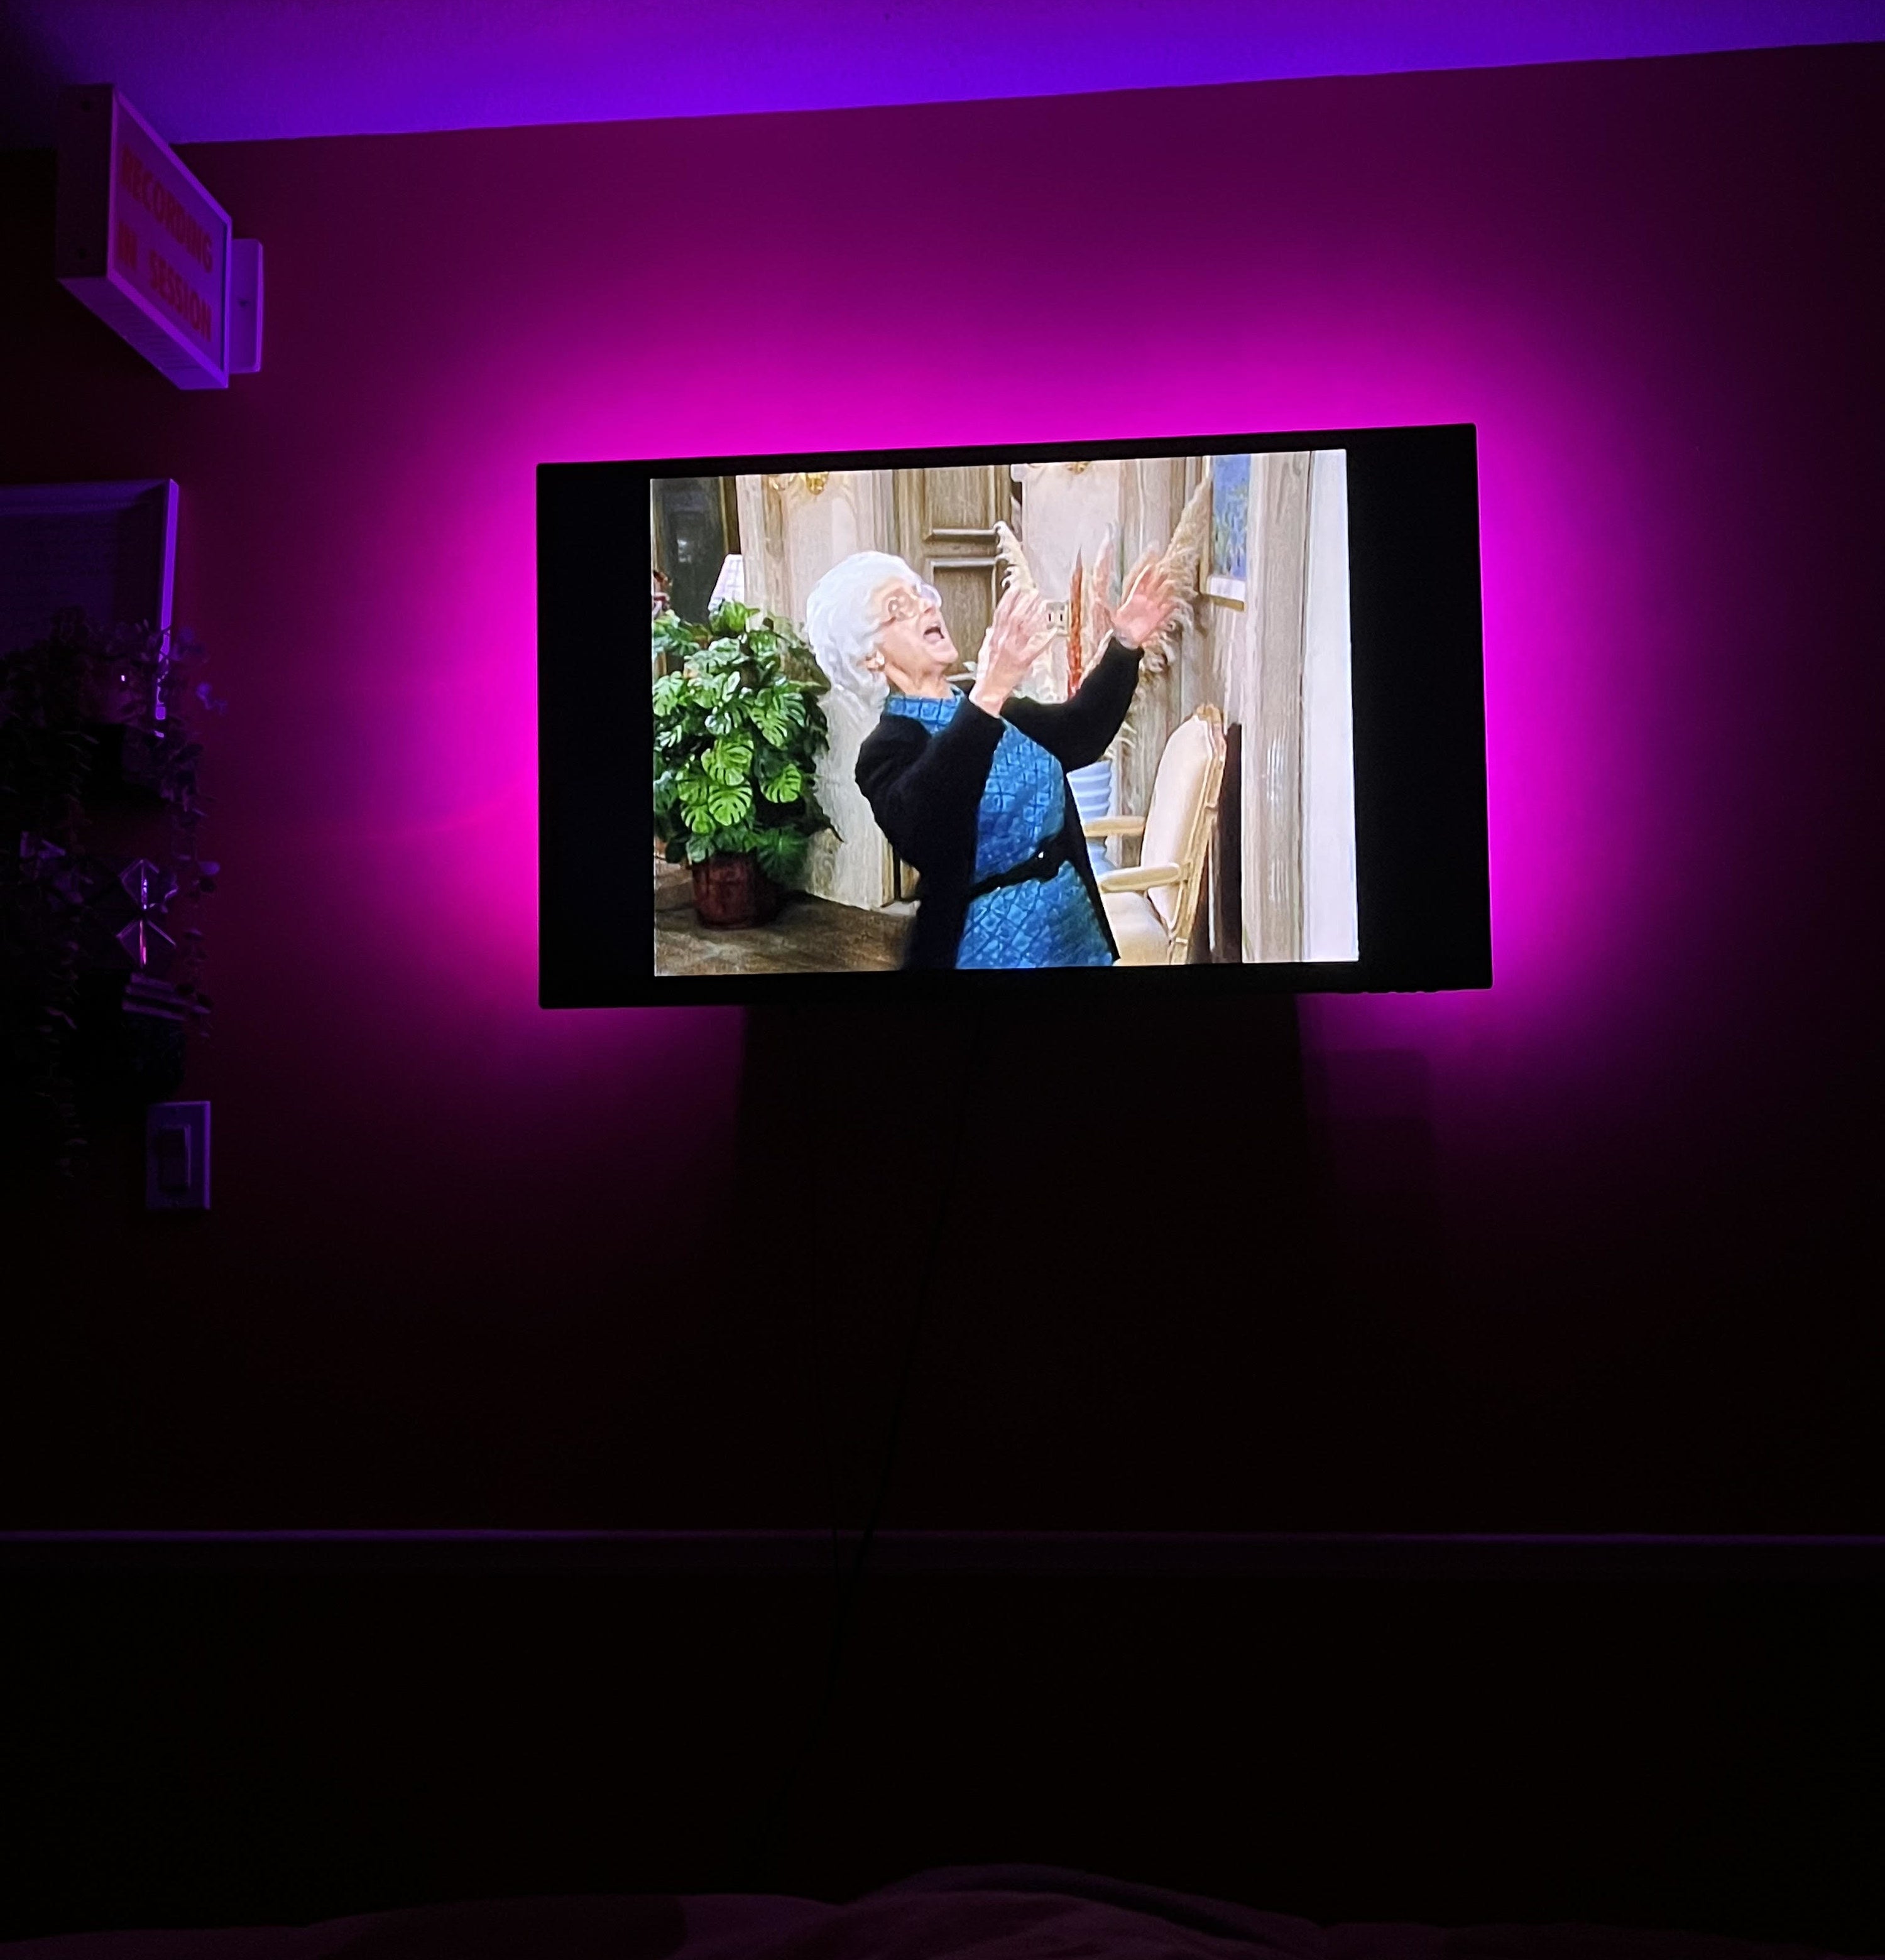 Bianca&#x27;s television at night playing an episode of The Golden Girls with the lights on behind her tv creating a glow around the screen